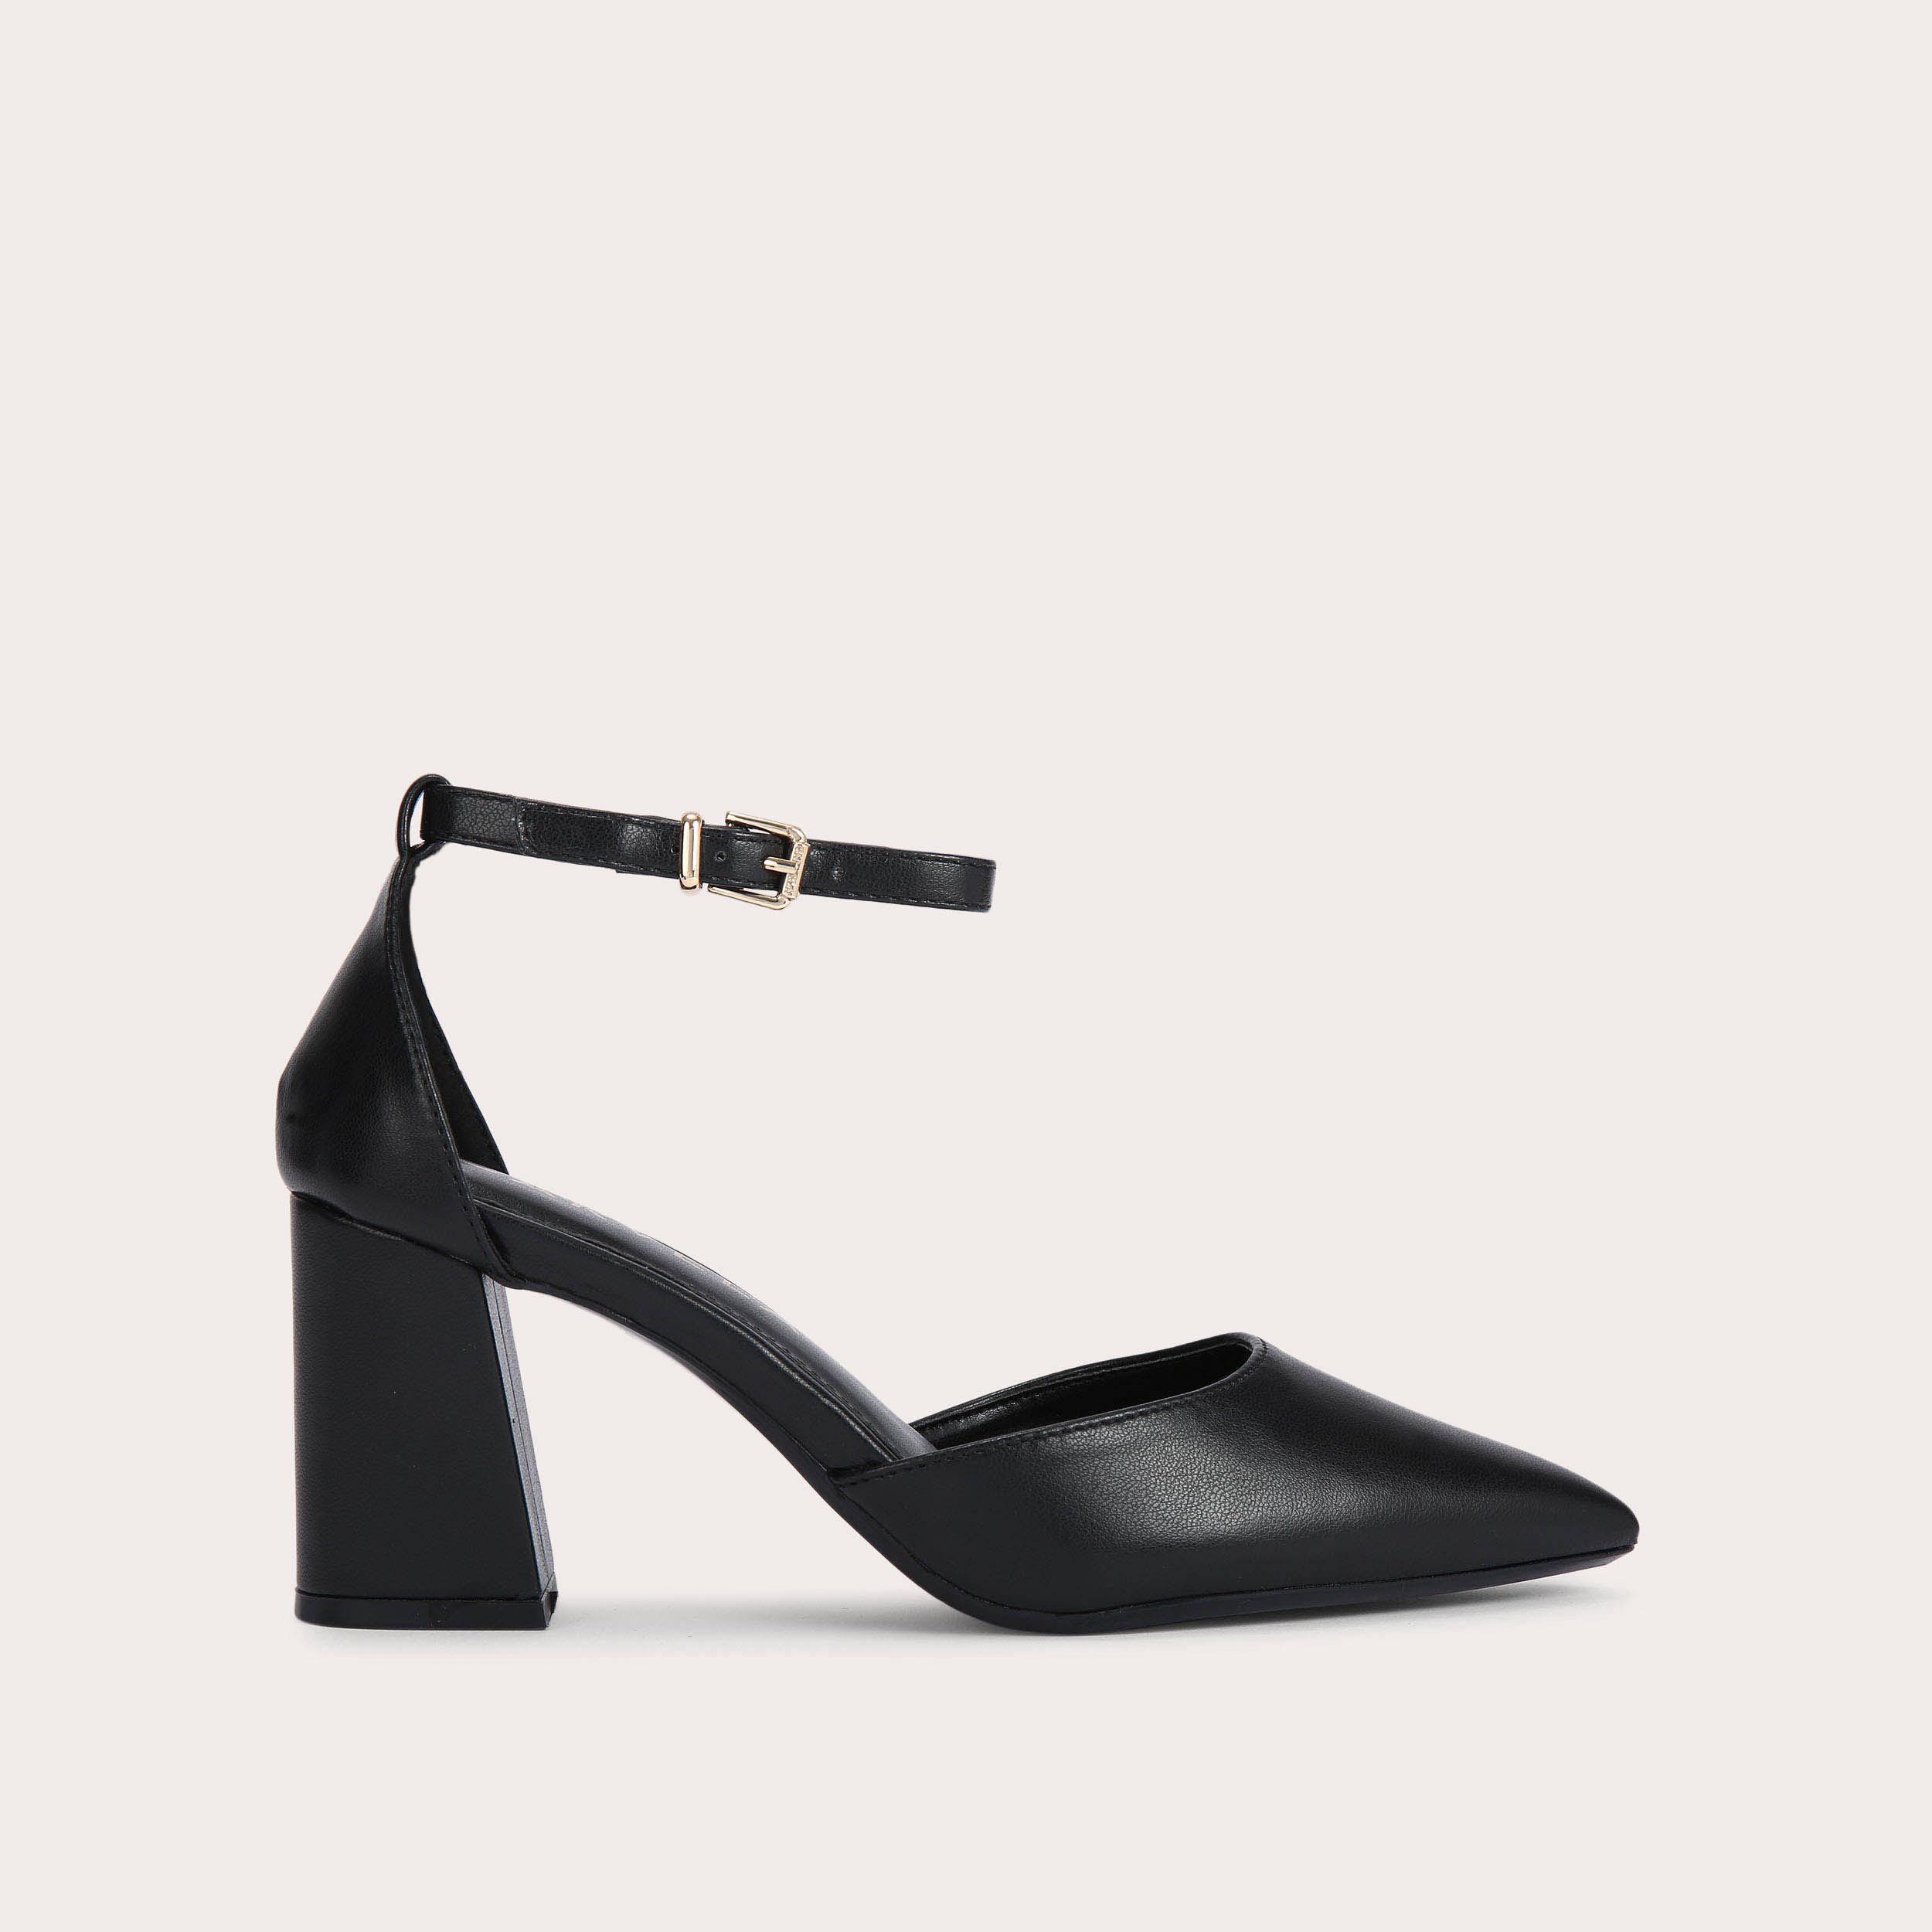 REFINED COURT Black Pointed Toe Block Heels by CARVELA